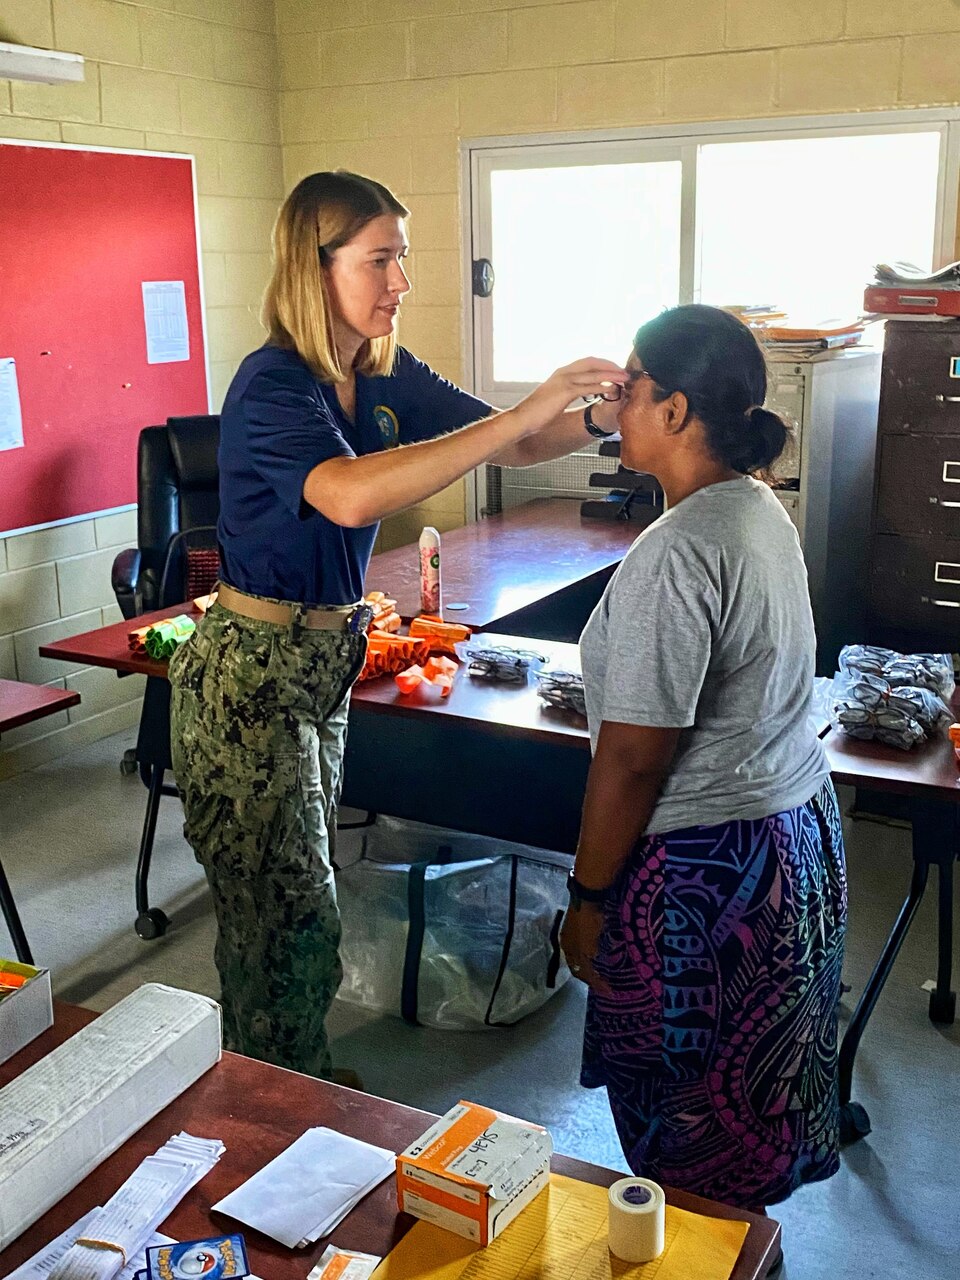 U.S. Navy Cdr. Mary Beth Linnell, optometrist, fits a woman on Ebeye for new glasses following her eye exam. Linnell and her Sailors were providing two days of dental, optometry and cardiology services on Ebeye, part of Pacific Partnership.